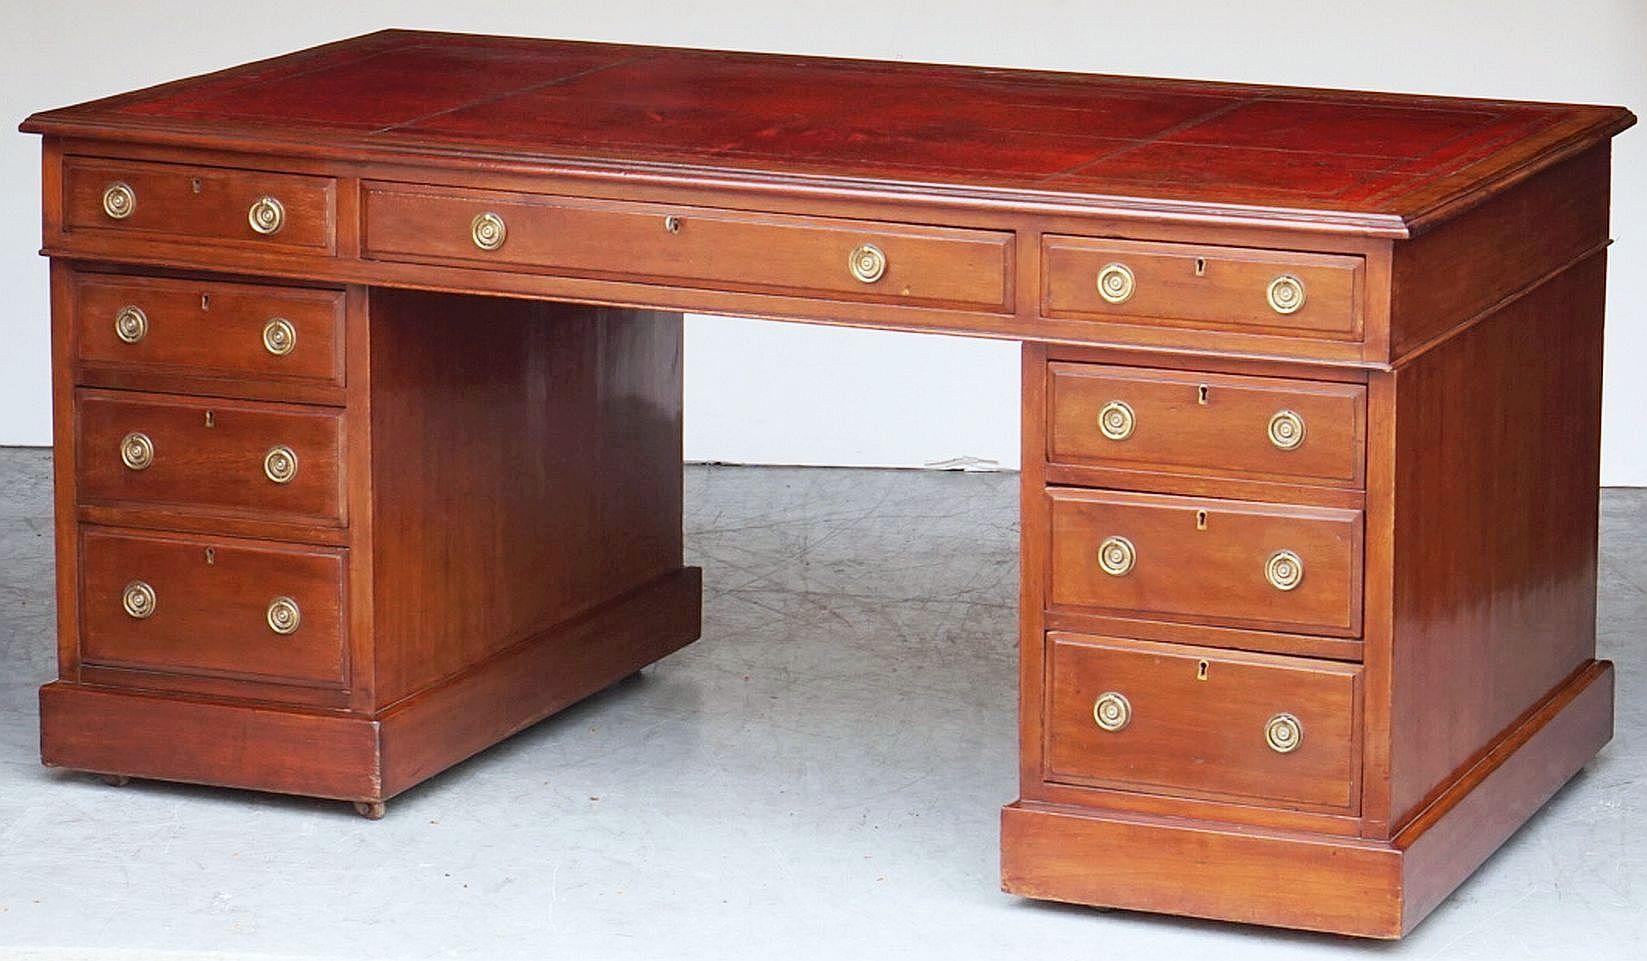 A handsome large English pedestal desk of mahogany, featuring a moulded top inset with an embossed leather, over a frieze with one long drawer flanked by two short drawers.
Resting on two pedestals, each with three short drawers on raised plinths